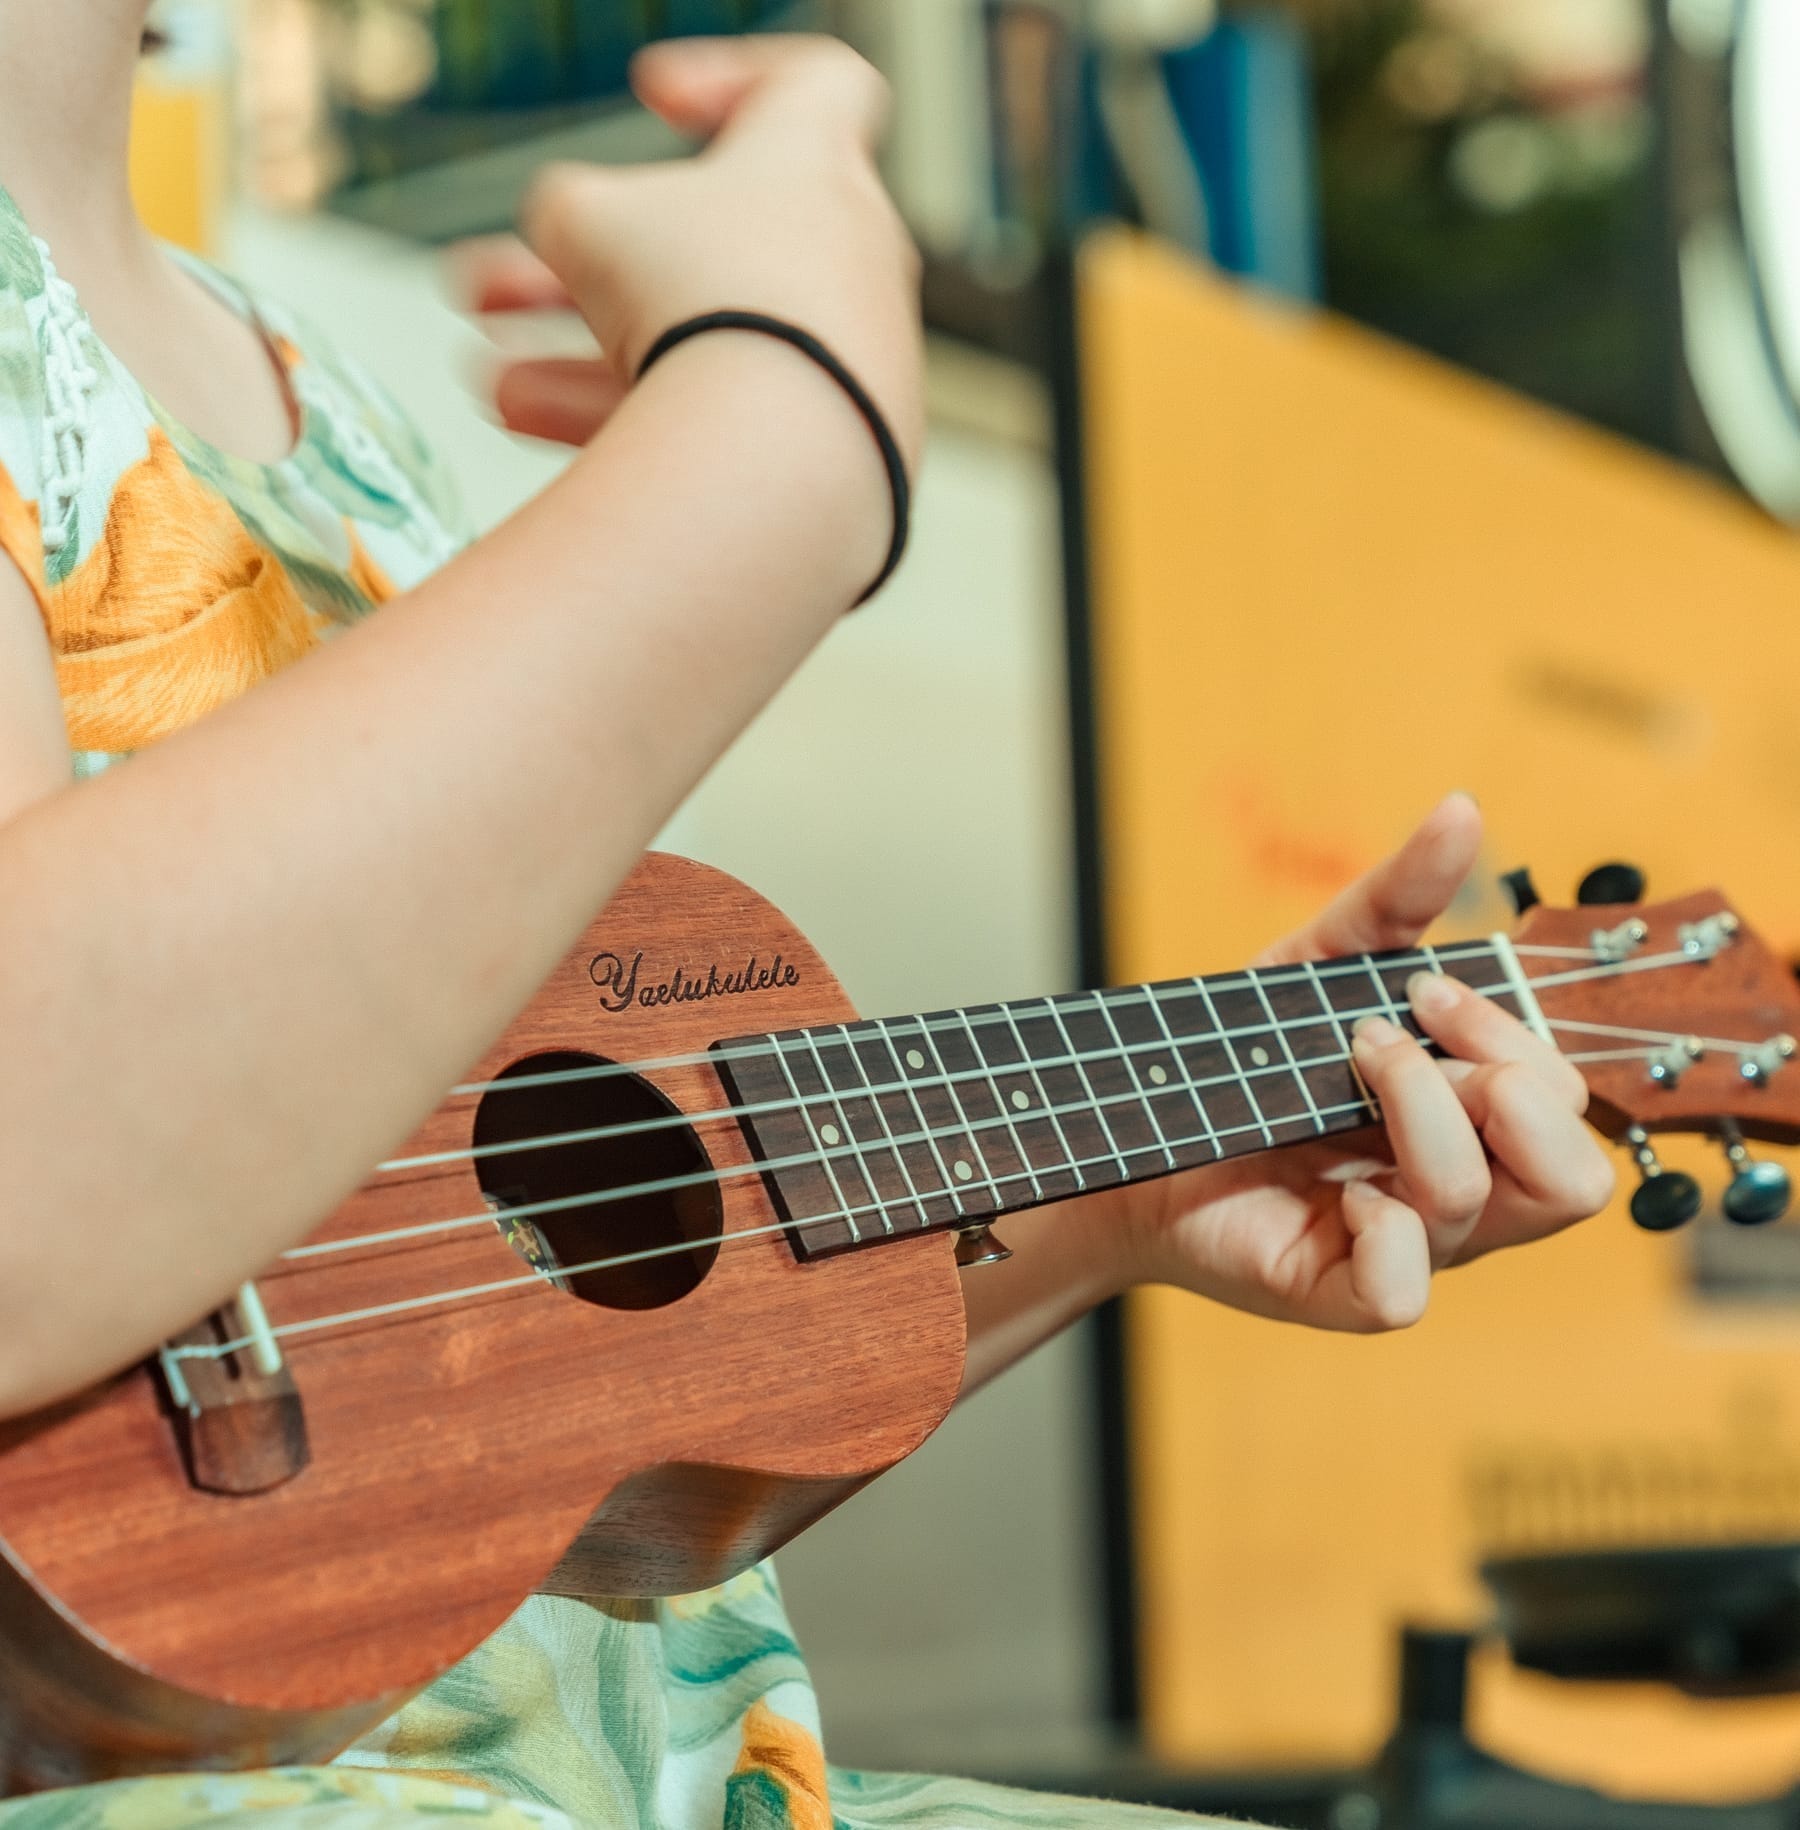 What to consider when choosing a music instrument to learn?